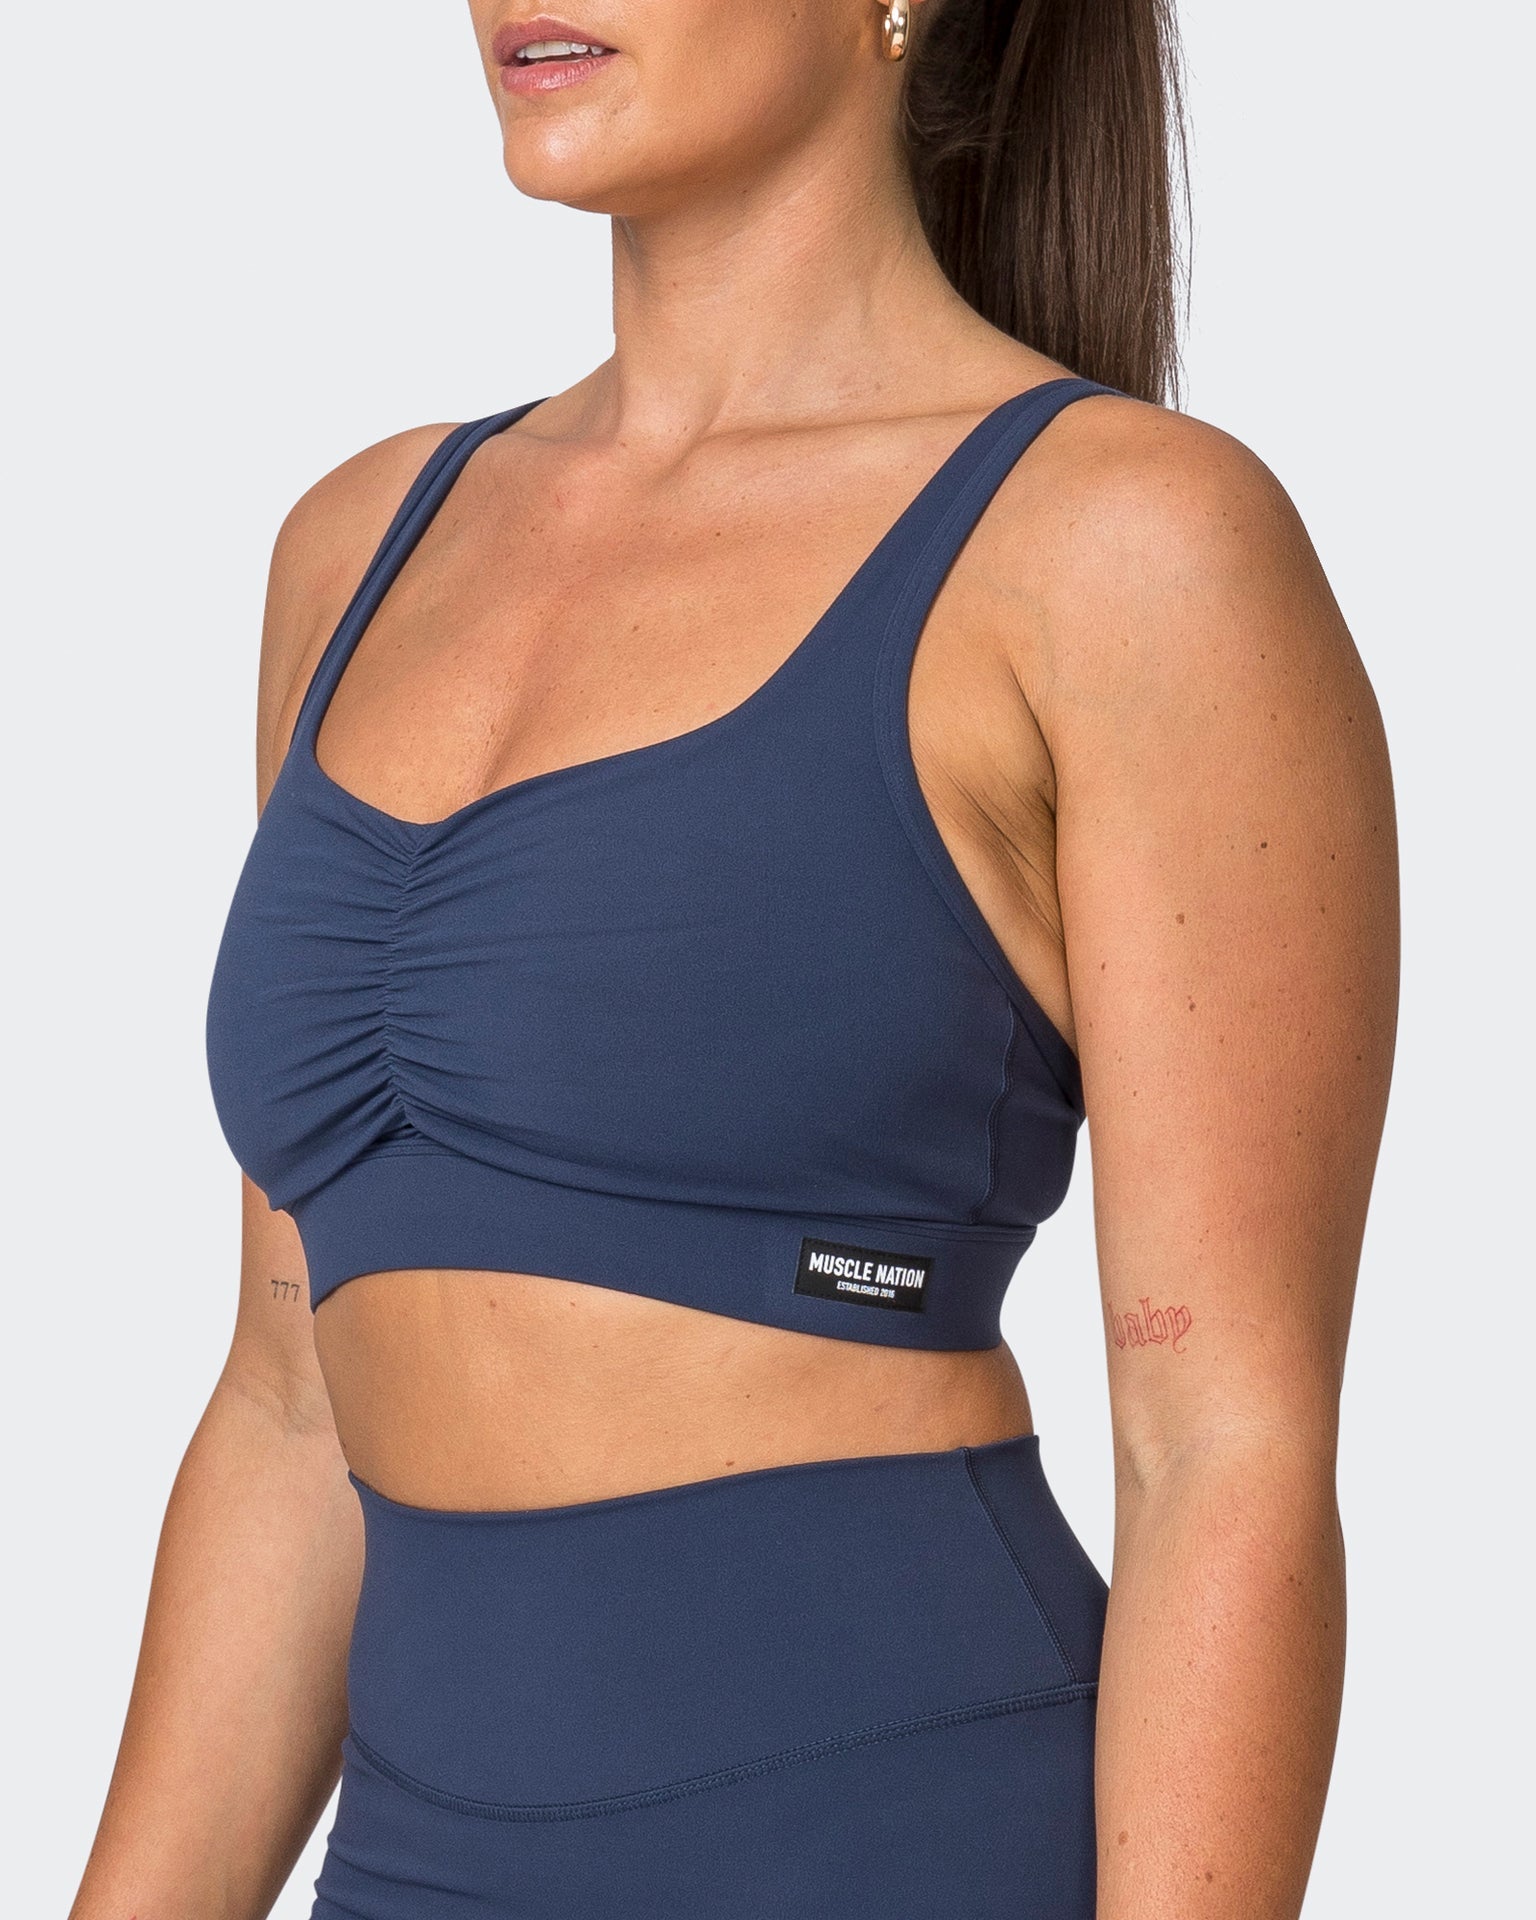 Muscle Nation Sports Bras Revive Bra - Spellbound